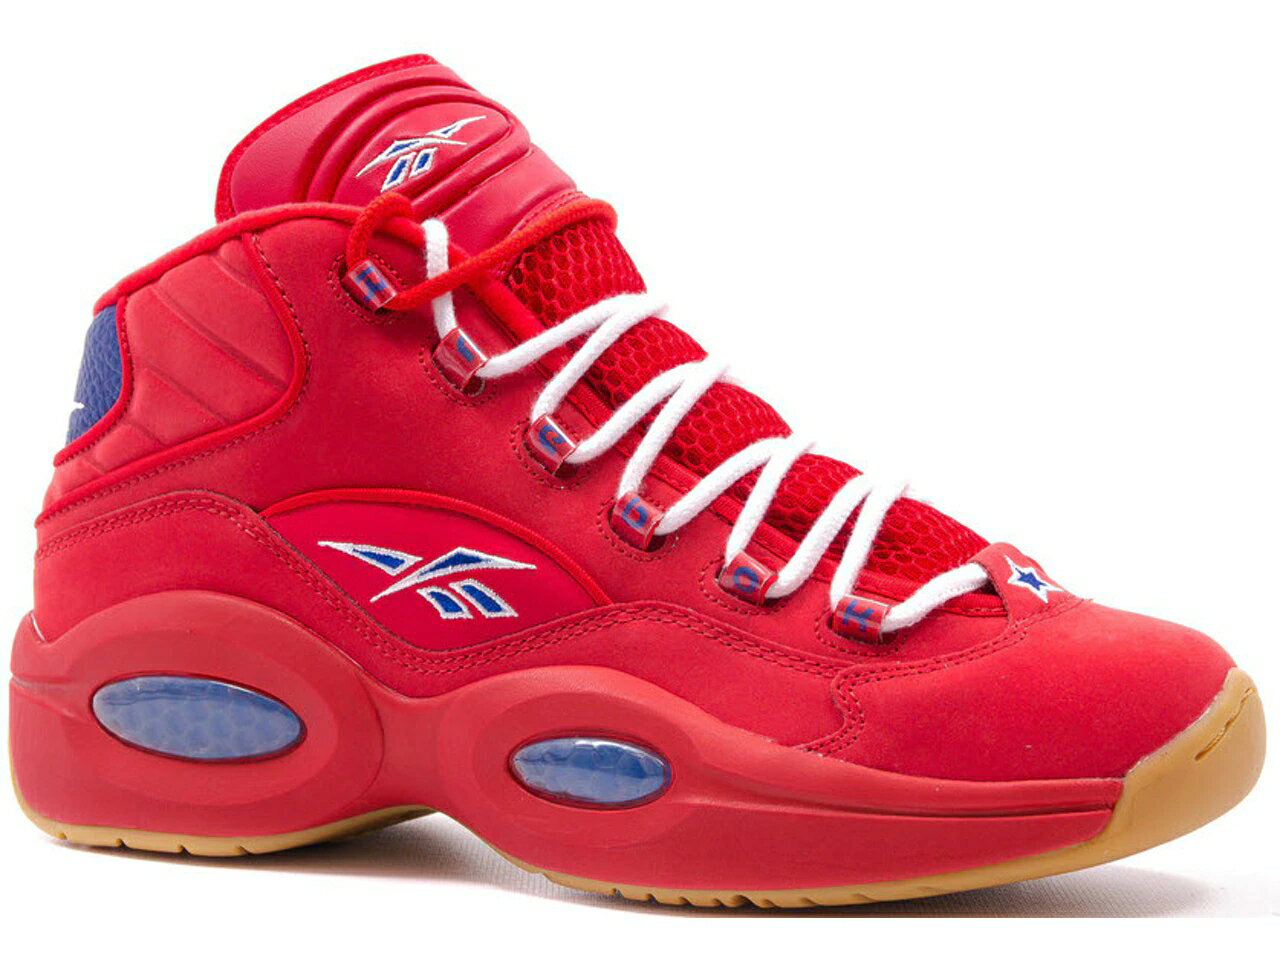 [{bN NGX` ~bh Xj[J[ ^C vNeBX  bh NGX`~bh PT. Xj[J[ Y y REEBOK QUESTION MID PACKER SHOES PRACTICE 2 / RED ATTACK ULTRAMARINE GUM z